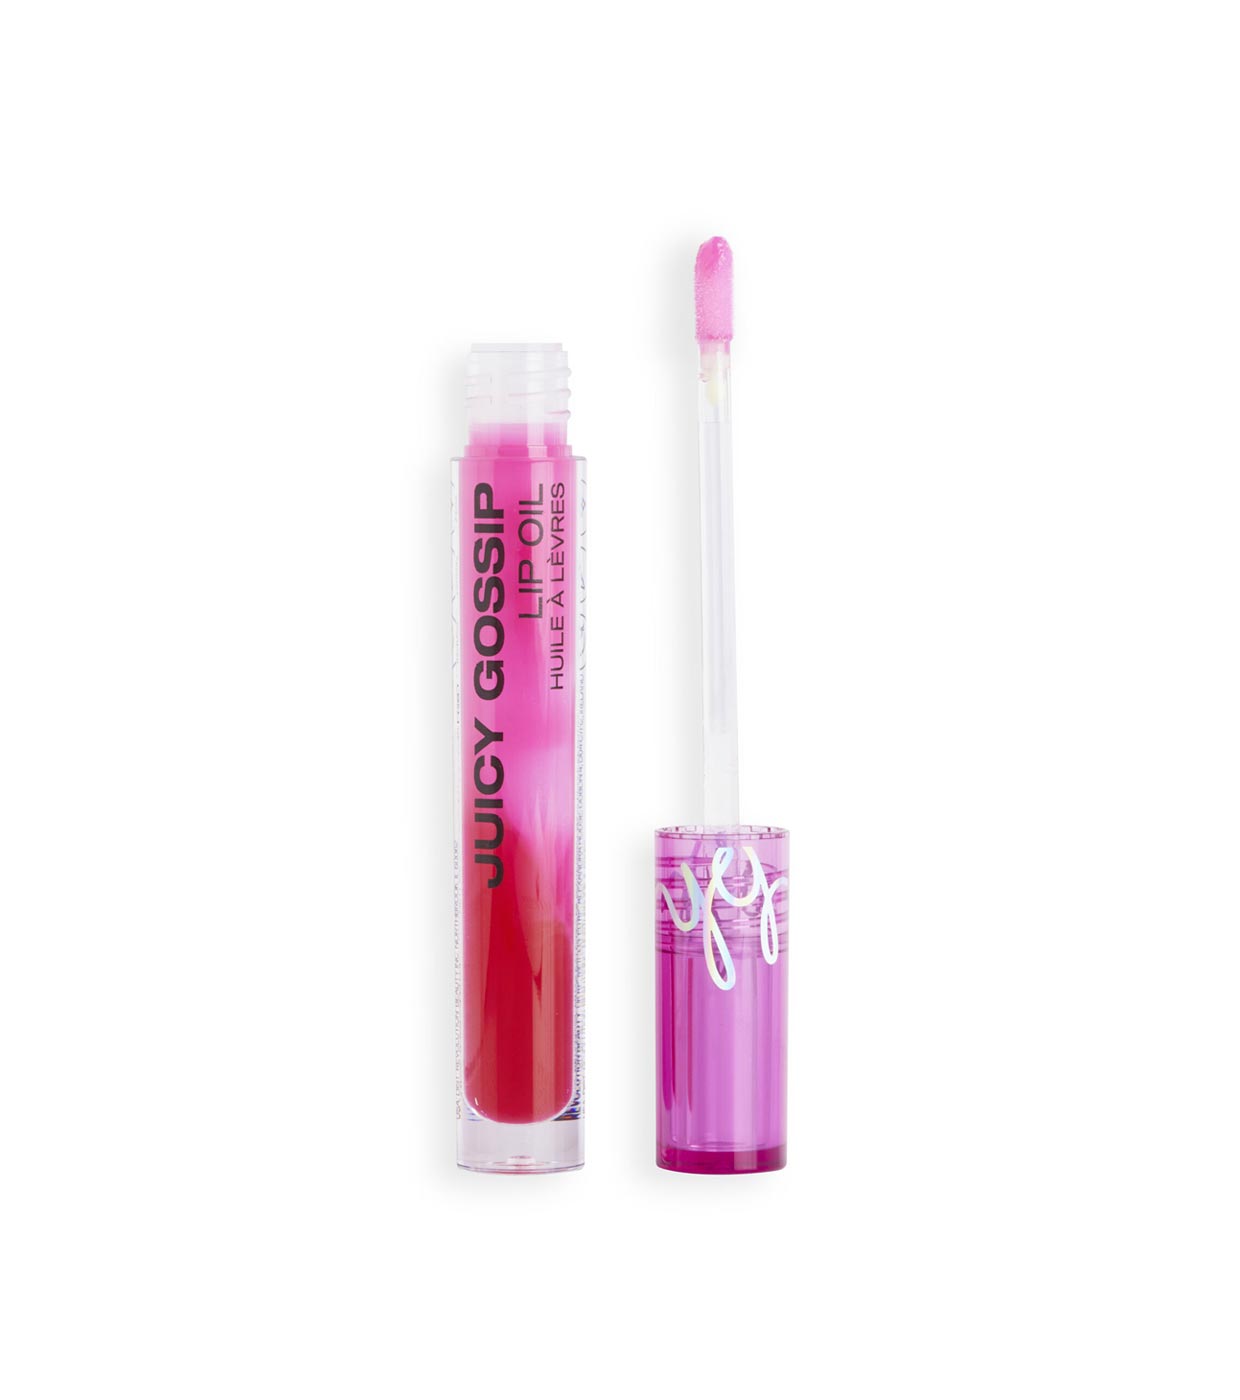 https://www.maquibeauty.pt/images/productos/bh-cosmetics-aceite-labial-juicy-gossip-candy-cherry-1-77912.jpeg